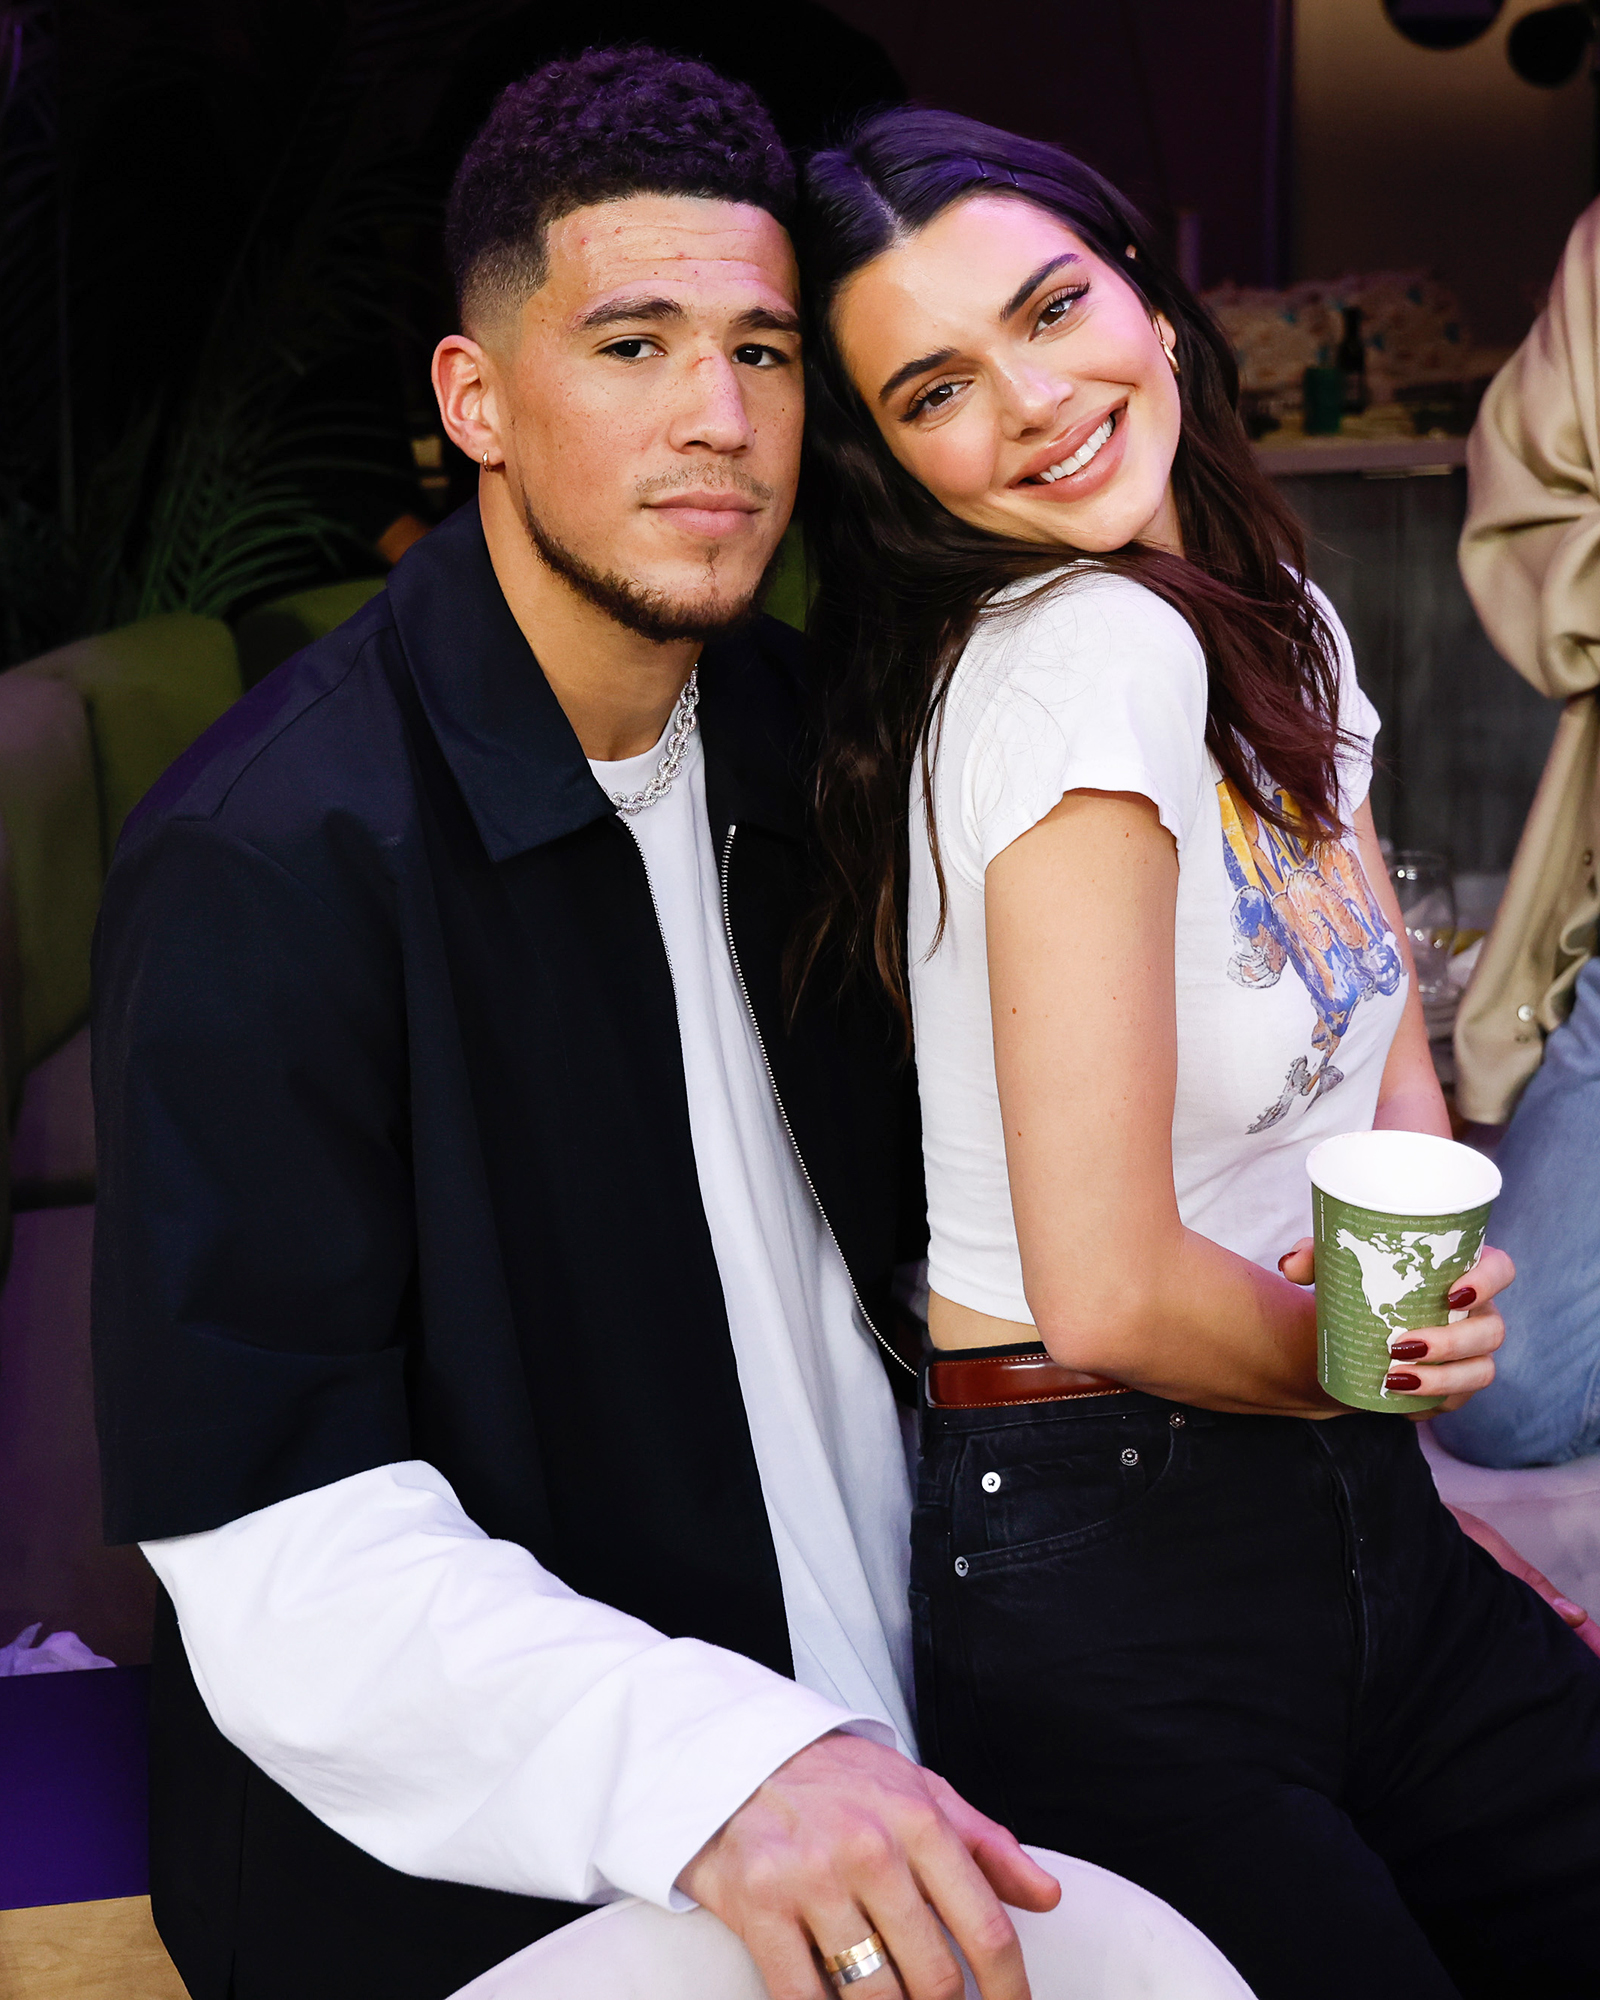 Kendall-Jenner-and-Boyfriend-Devin-Booker-Have-Low-Key-Date-Night-Playing-Sorry-Together-Feature.jpg